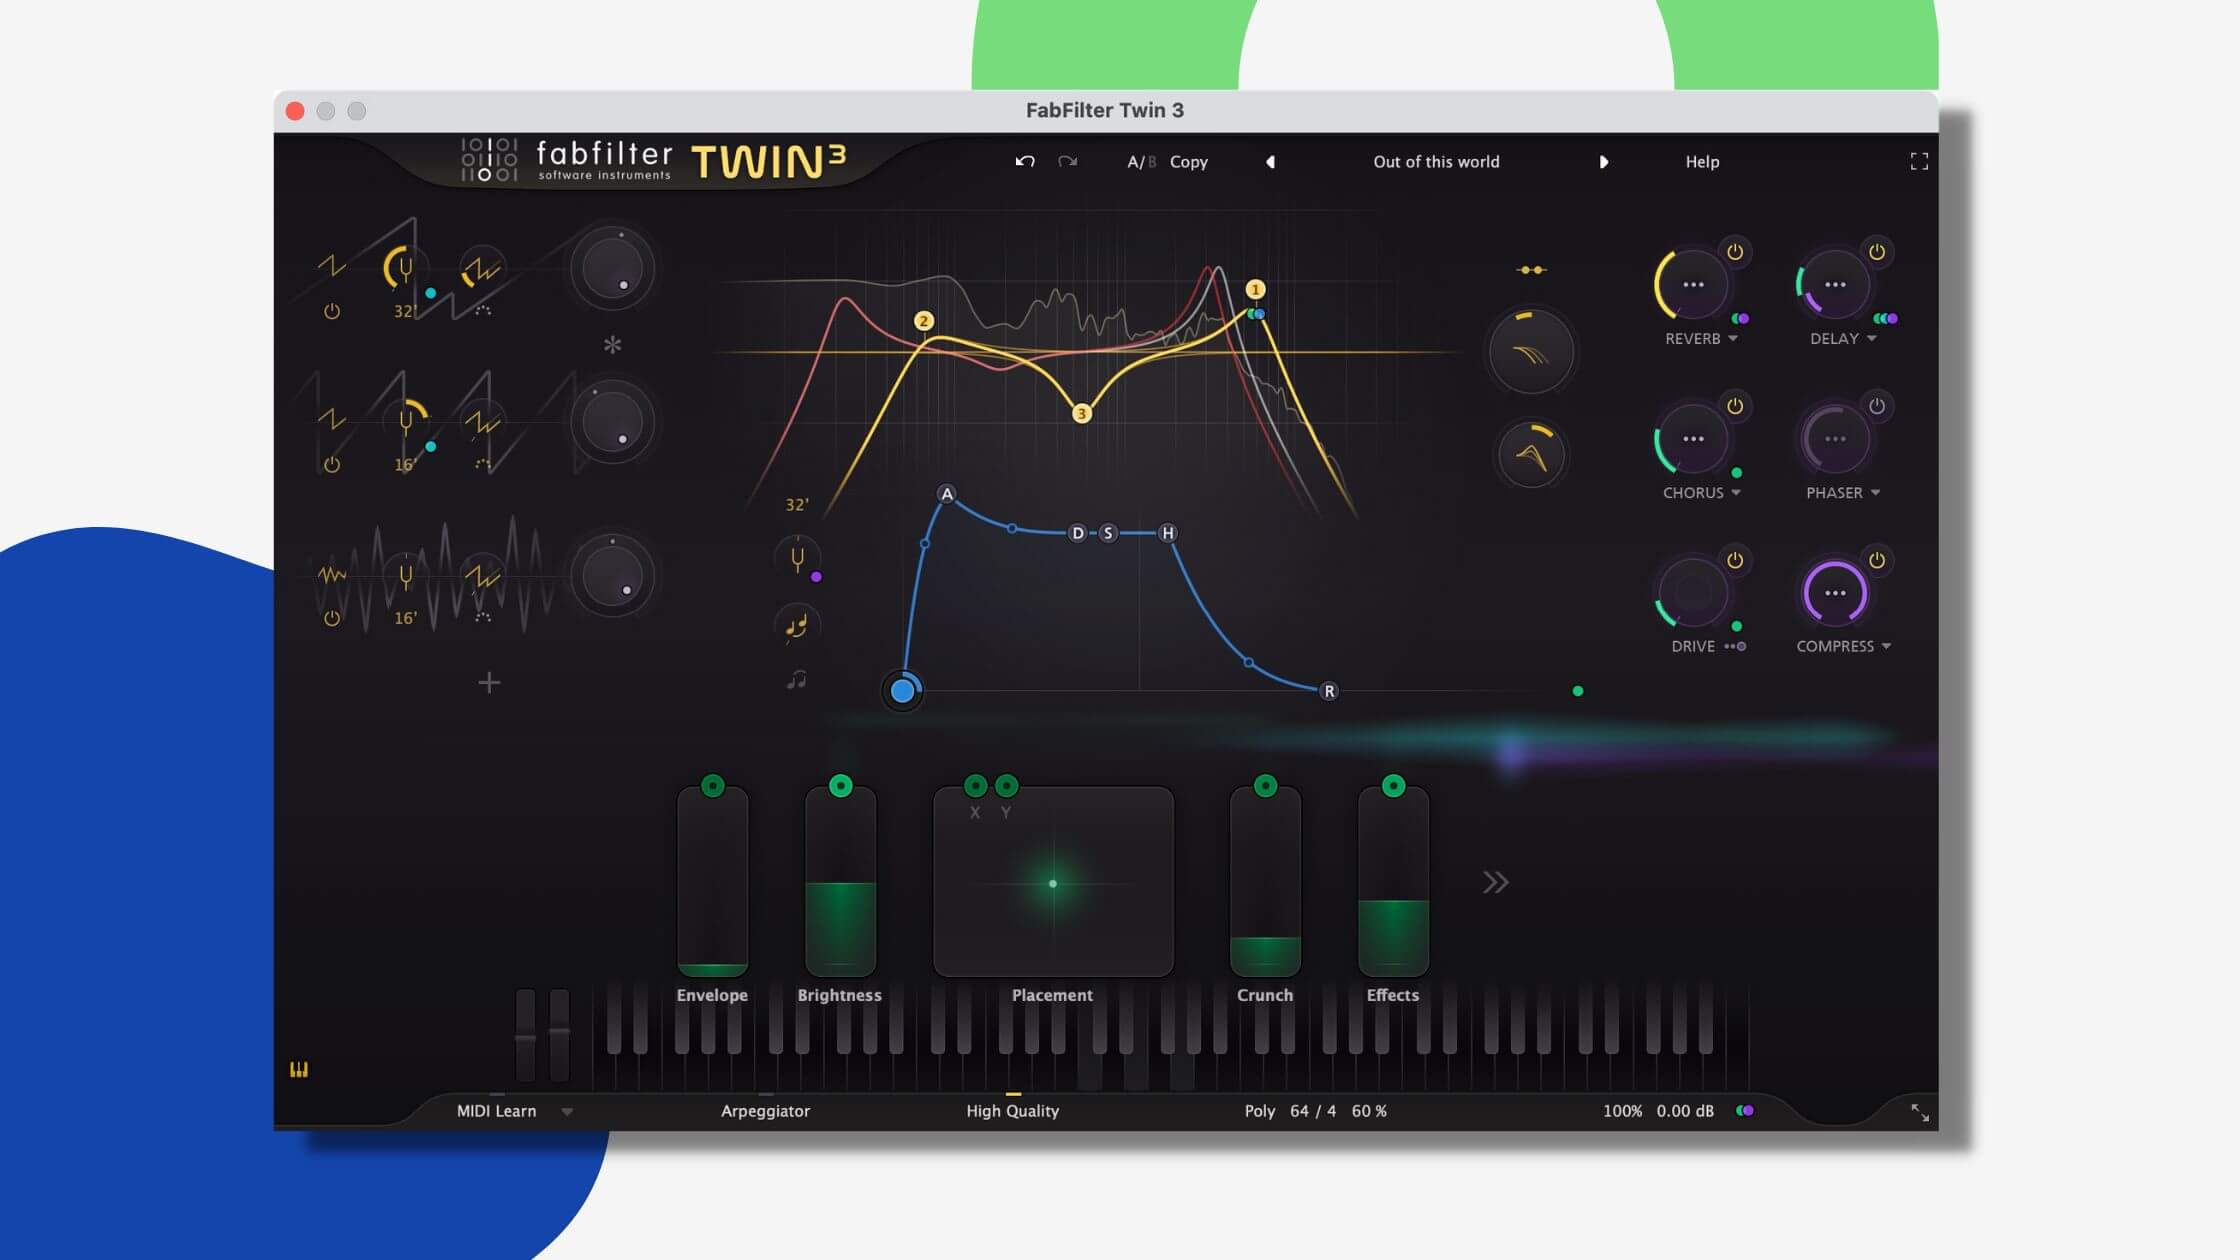 FabFilter Twin 3 is here with huge UI improvements for a better sound design experience